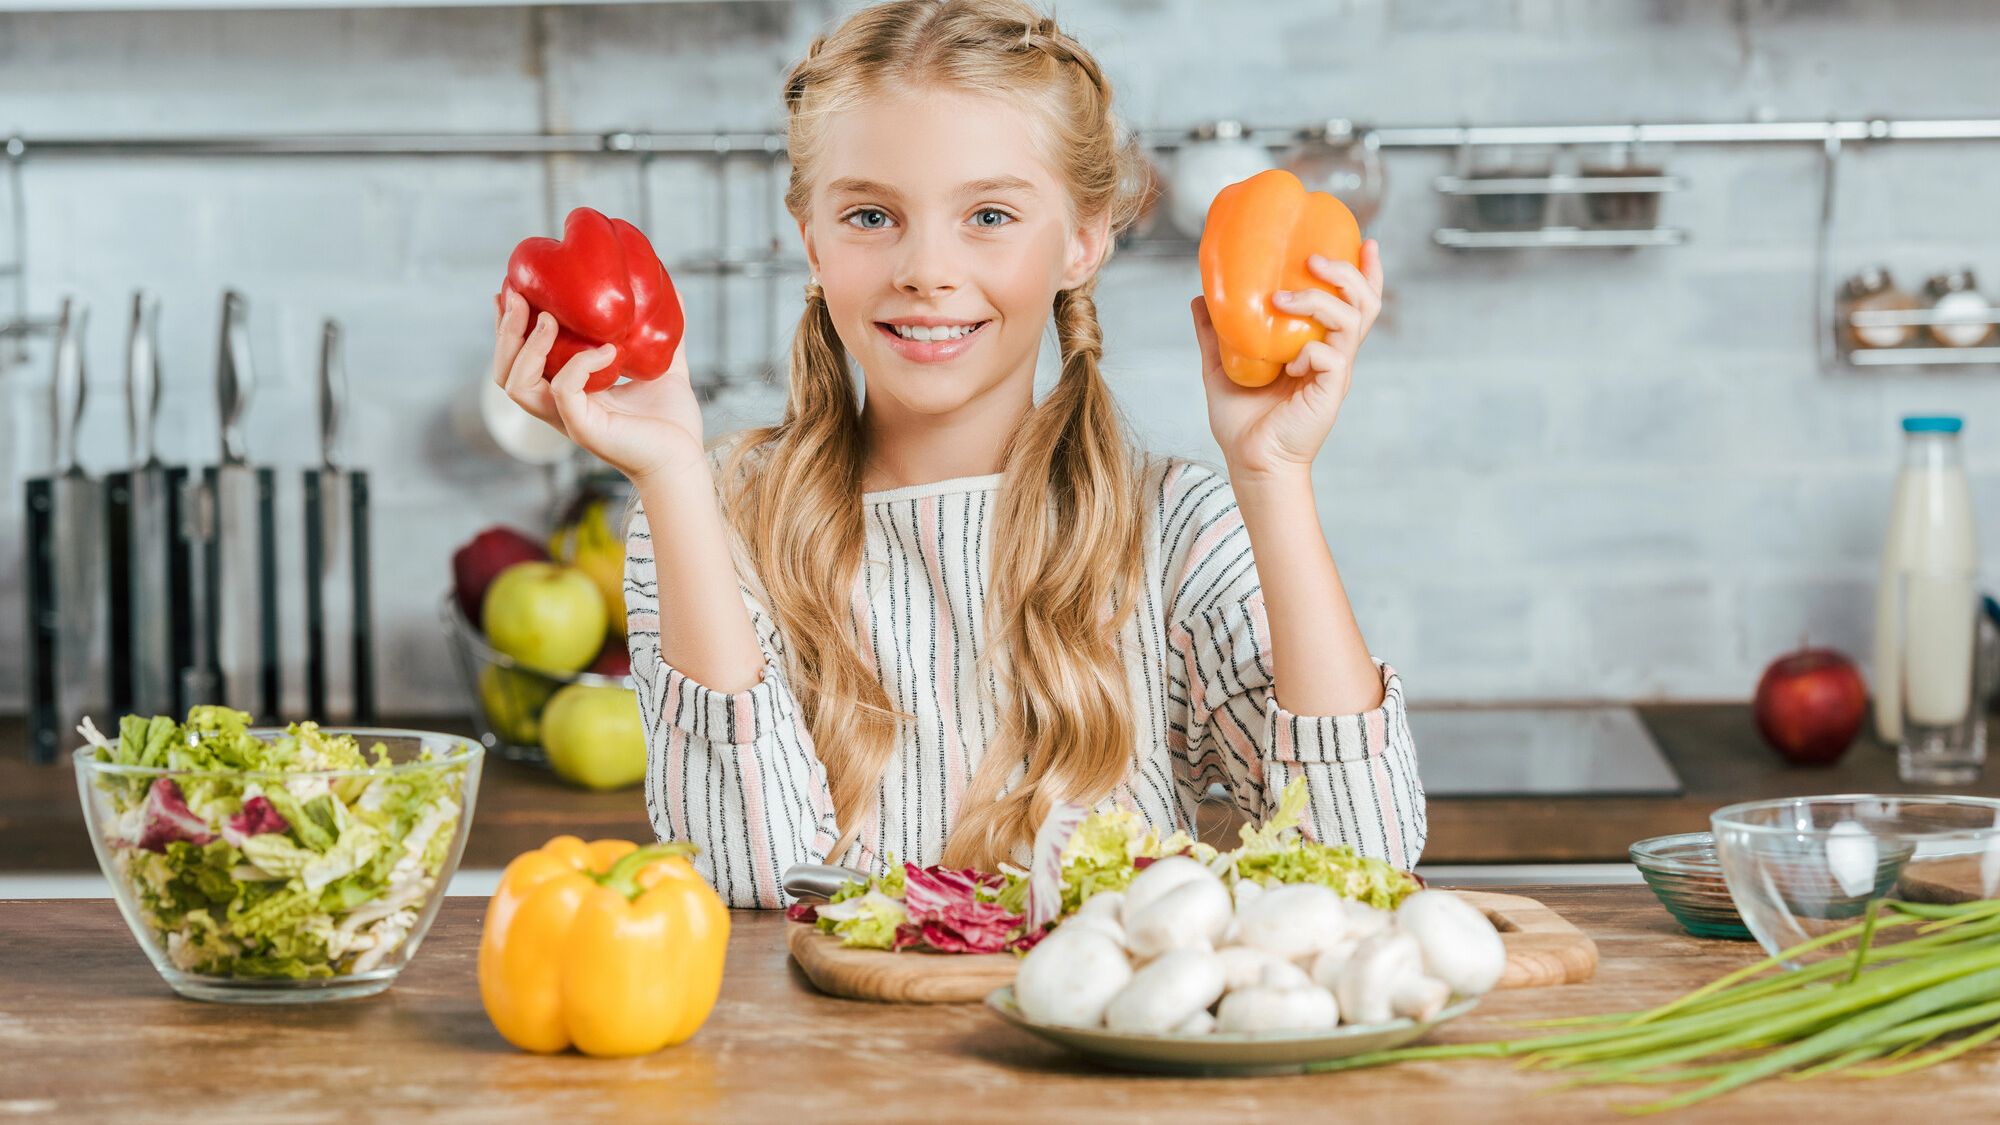 My child or teenager wants to become vegetarian: how can I balance their meals?